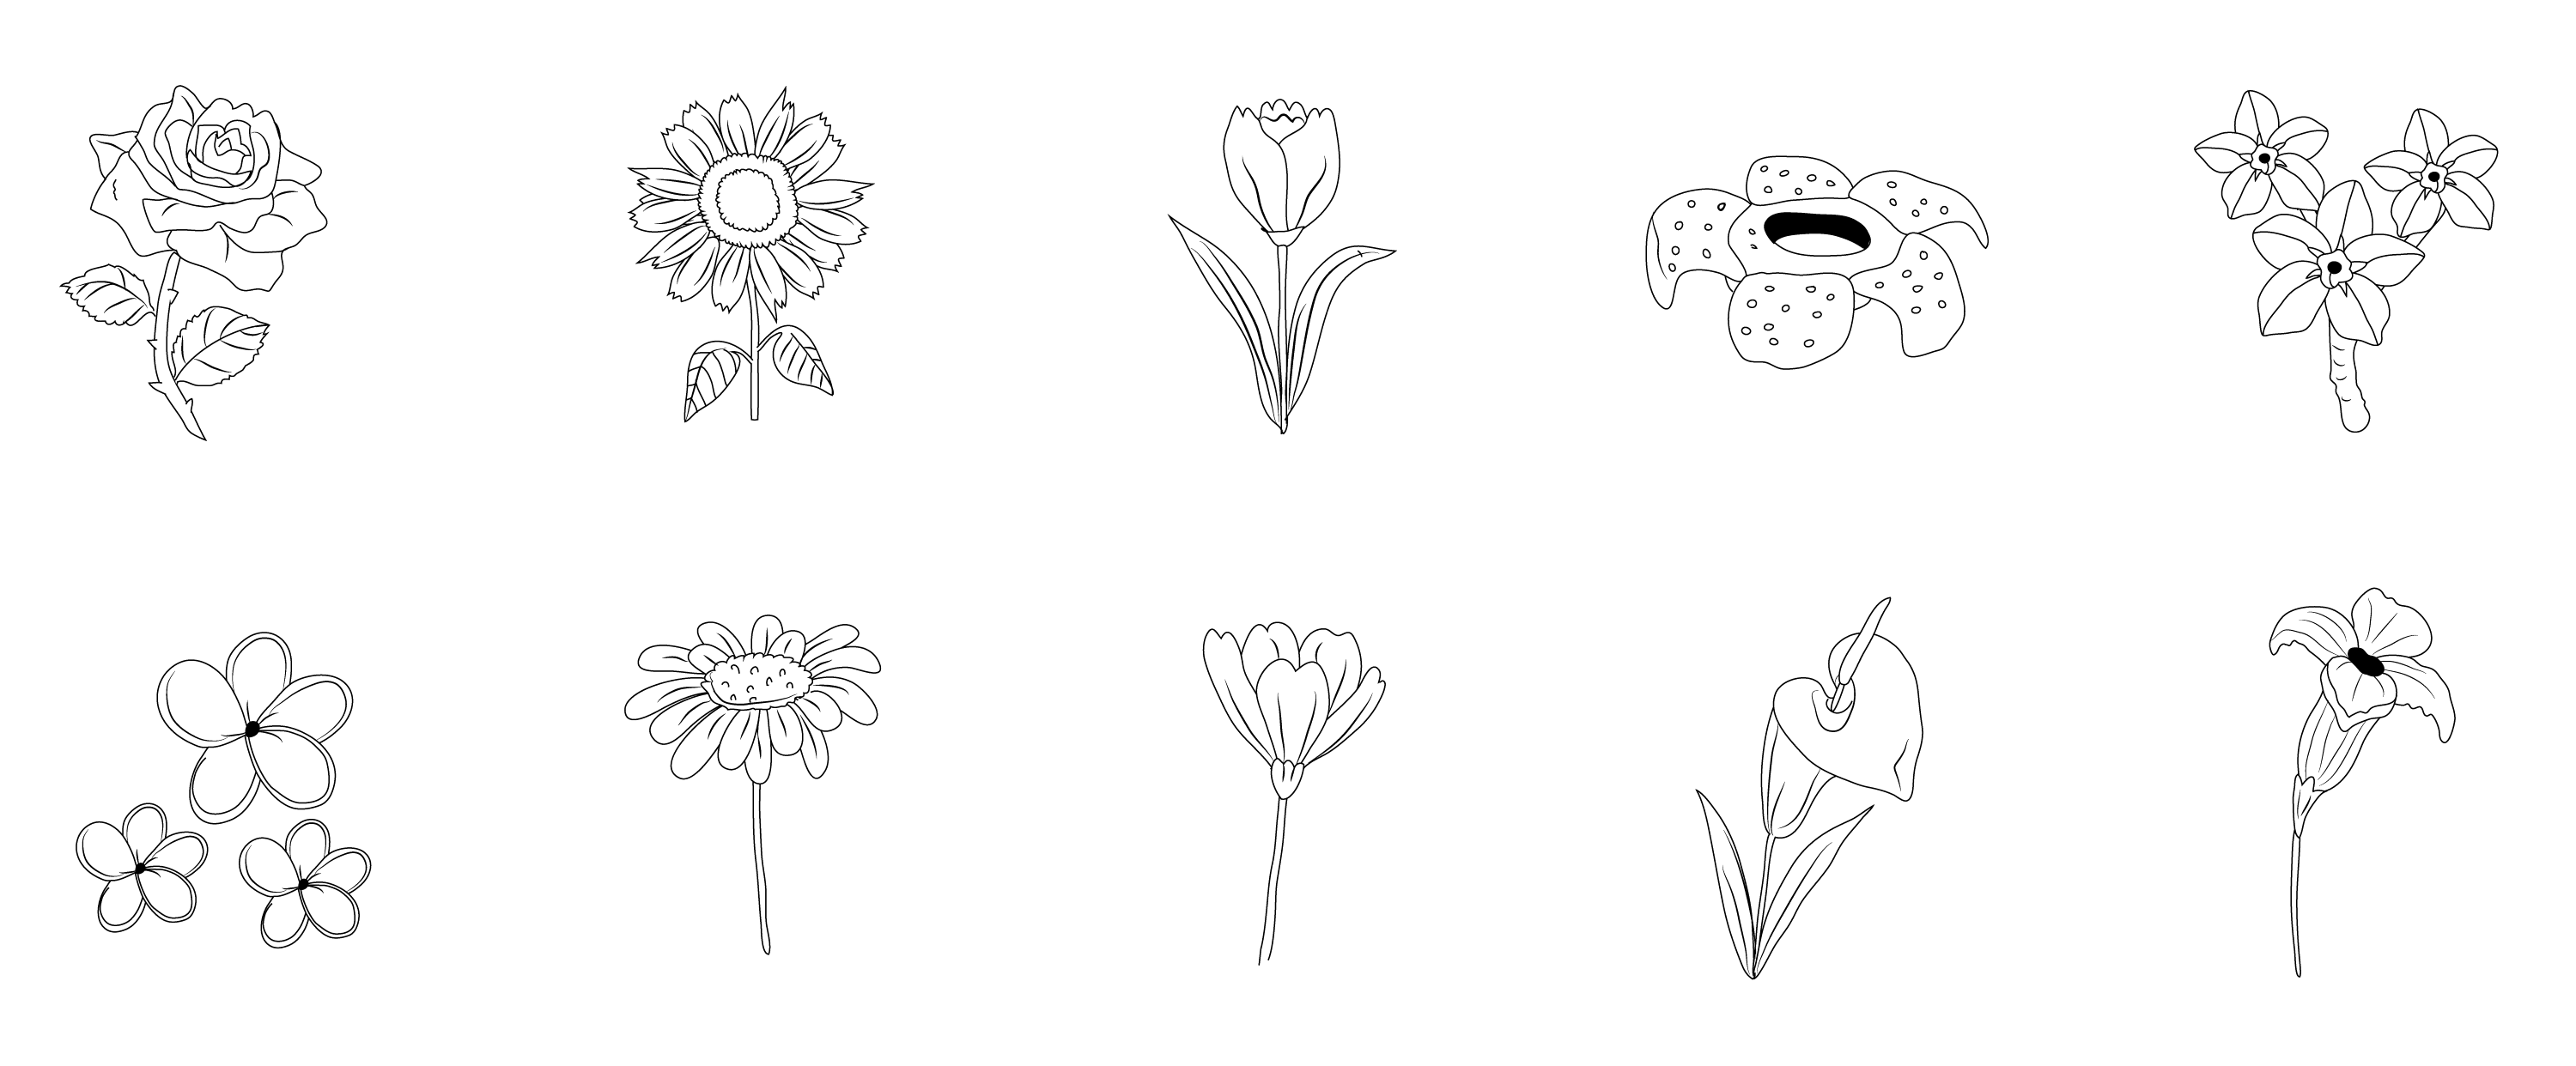 free clipart. line drawings of flowers - photo #33